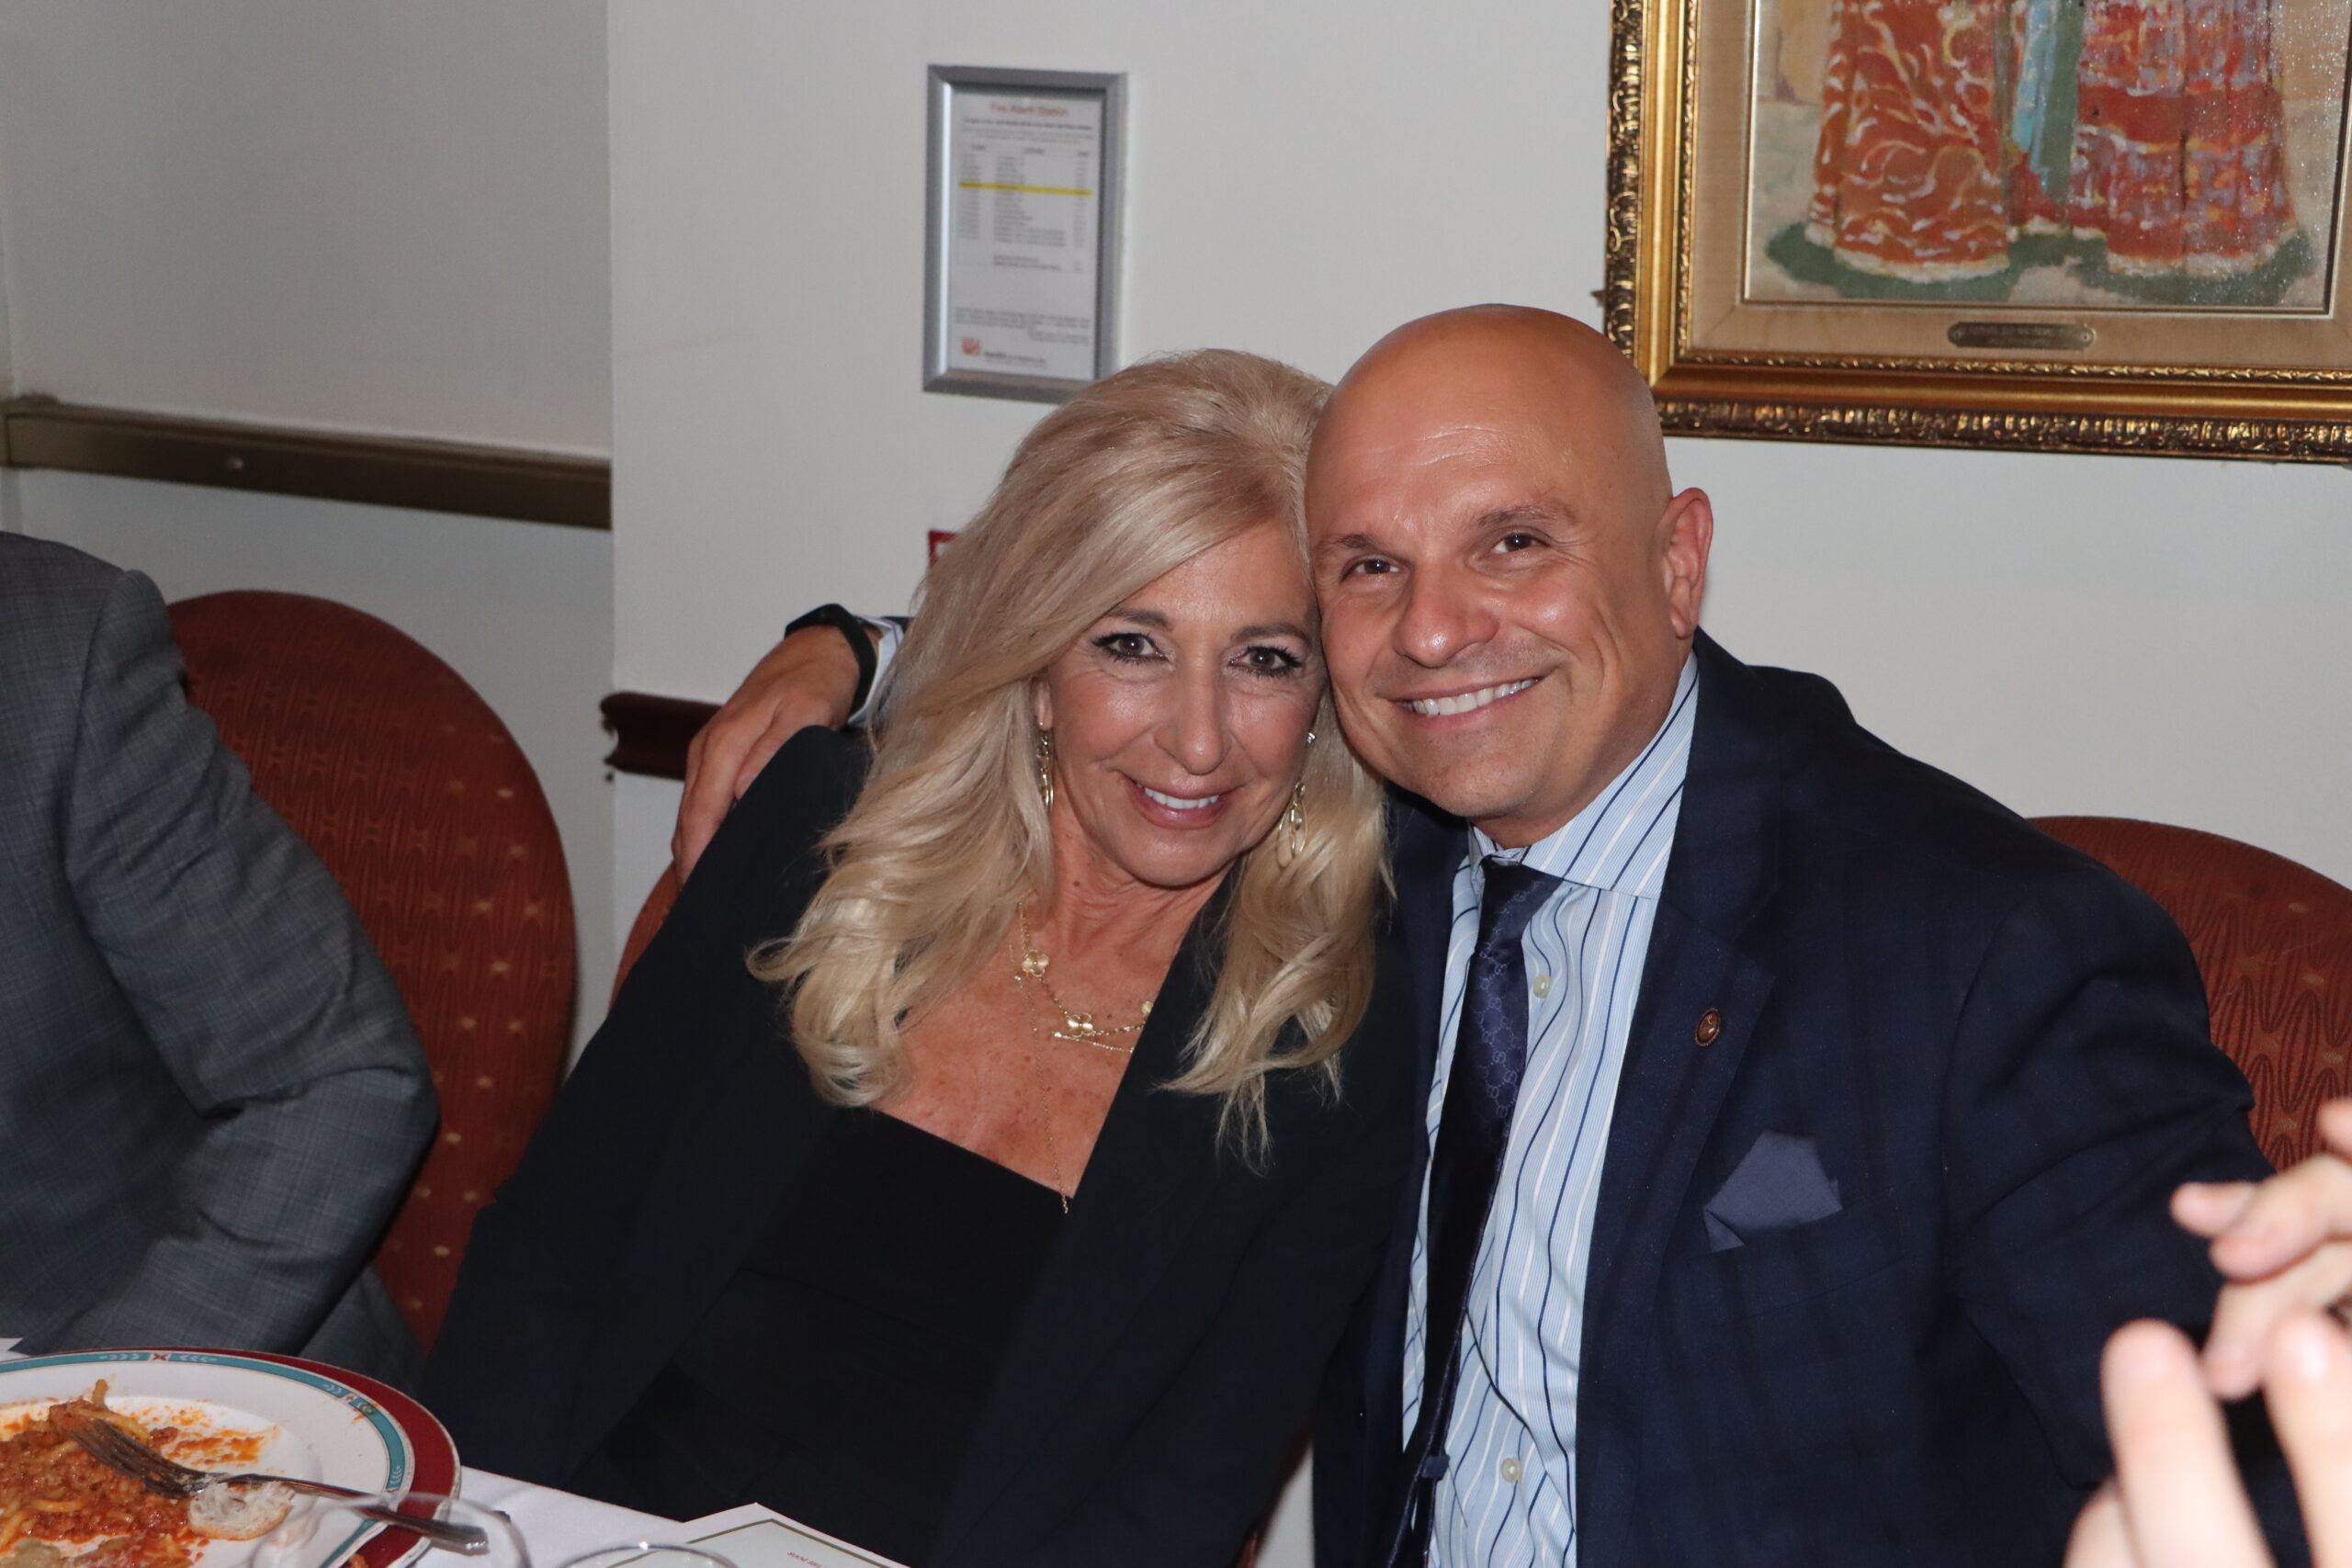 Patricia DiMango, of the Amazon Prime show Tribunal Justice, and television legal analyst and radio personality Arthur Aidala at Columbian Lawyers Association annual Italian Heritage event.